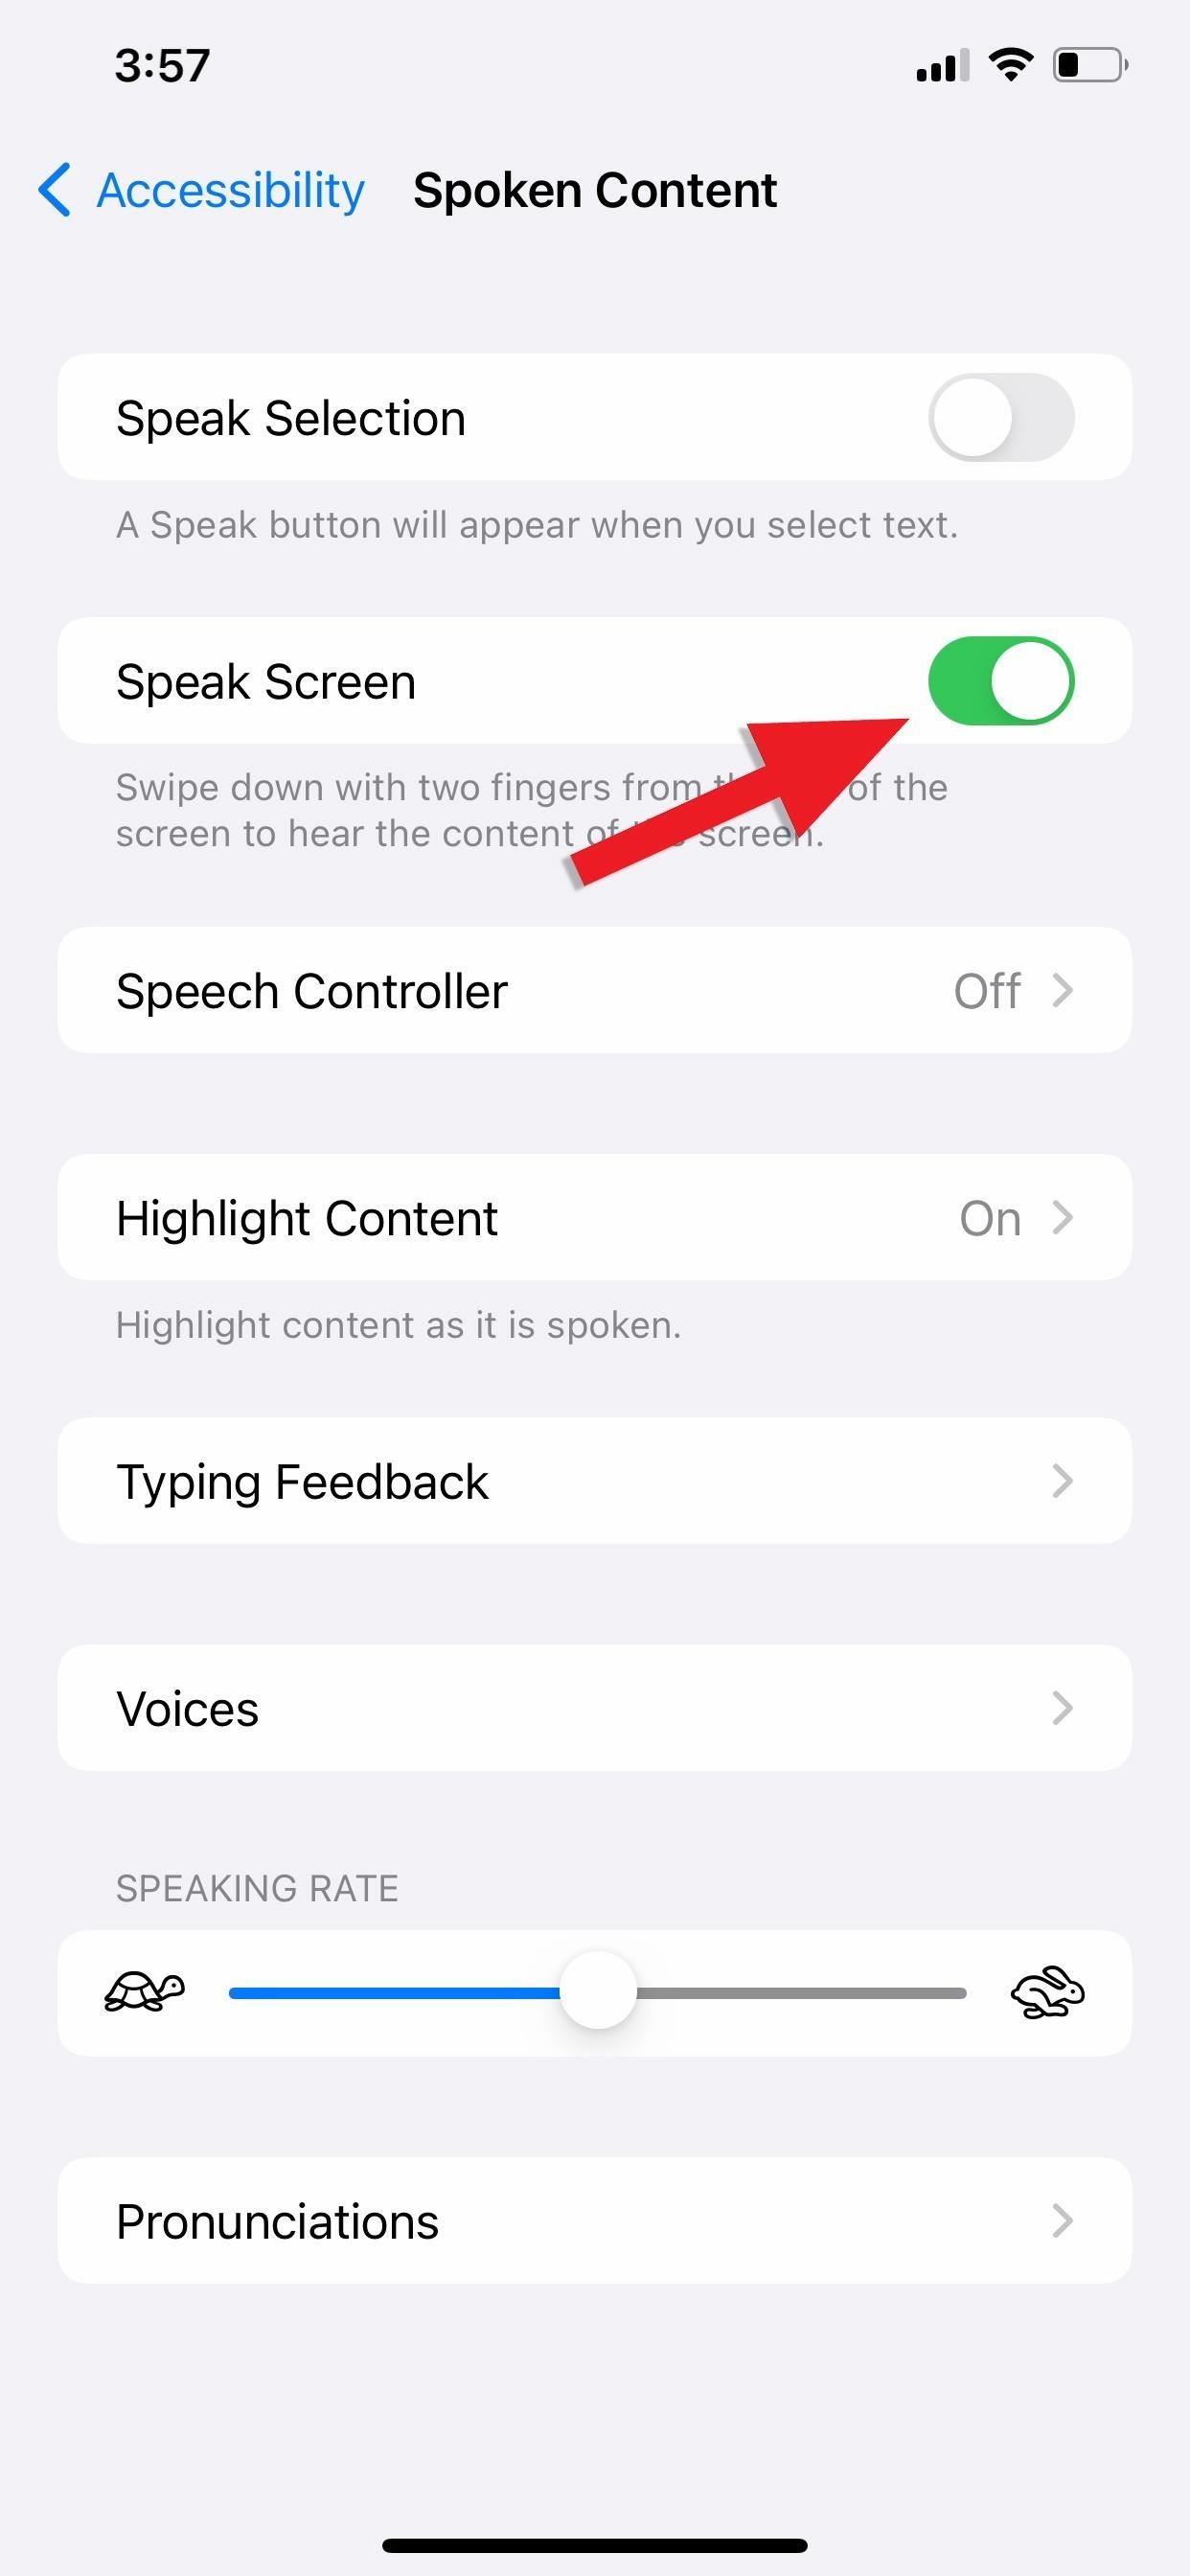 Your iPhone Has a Hidden Text-to-Speech Tool That'll Read Articles, Books, News, and Other Text Out Loud to You